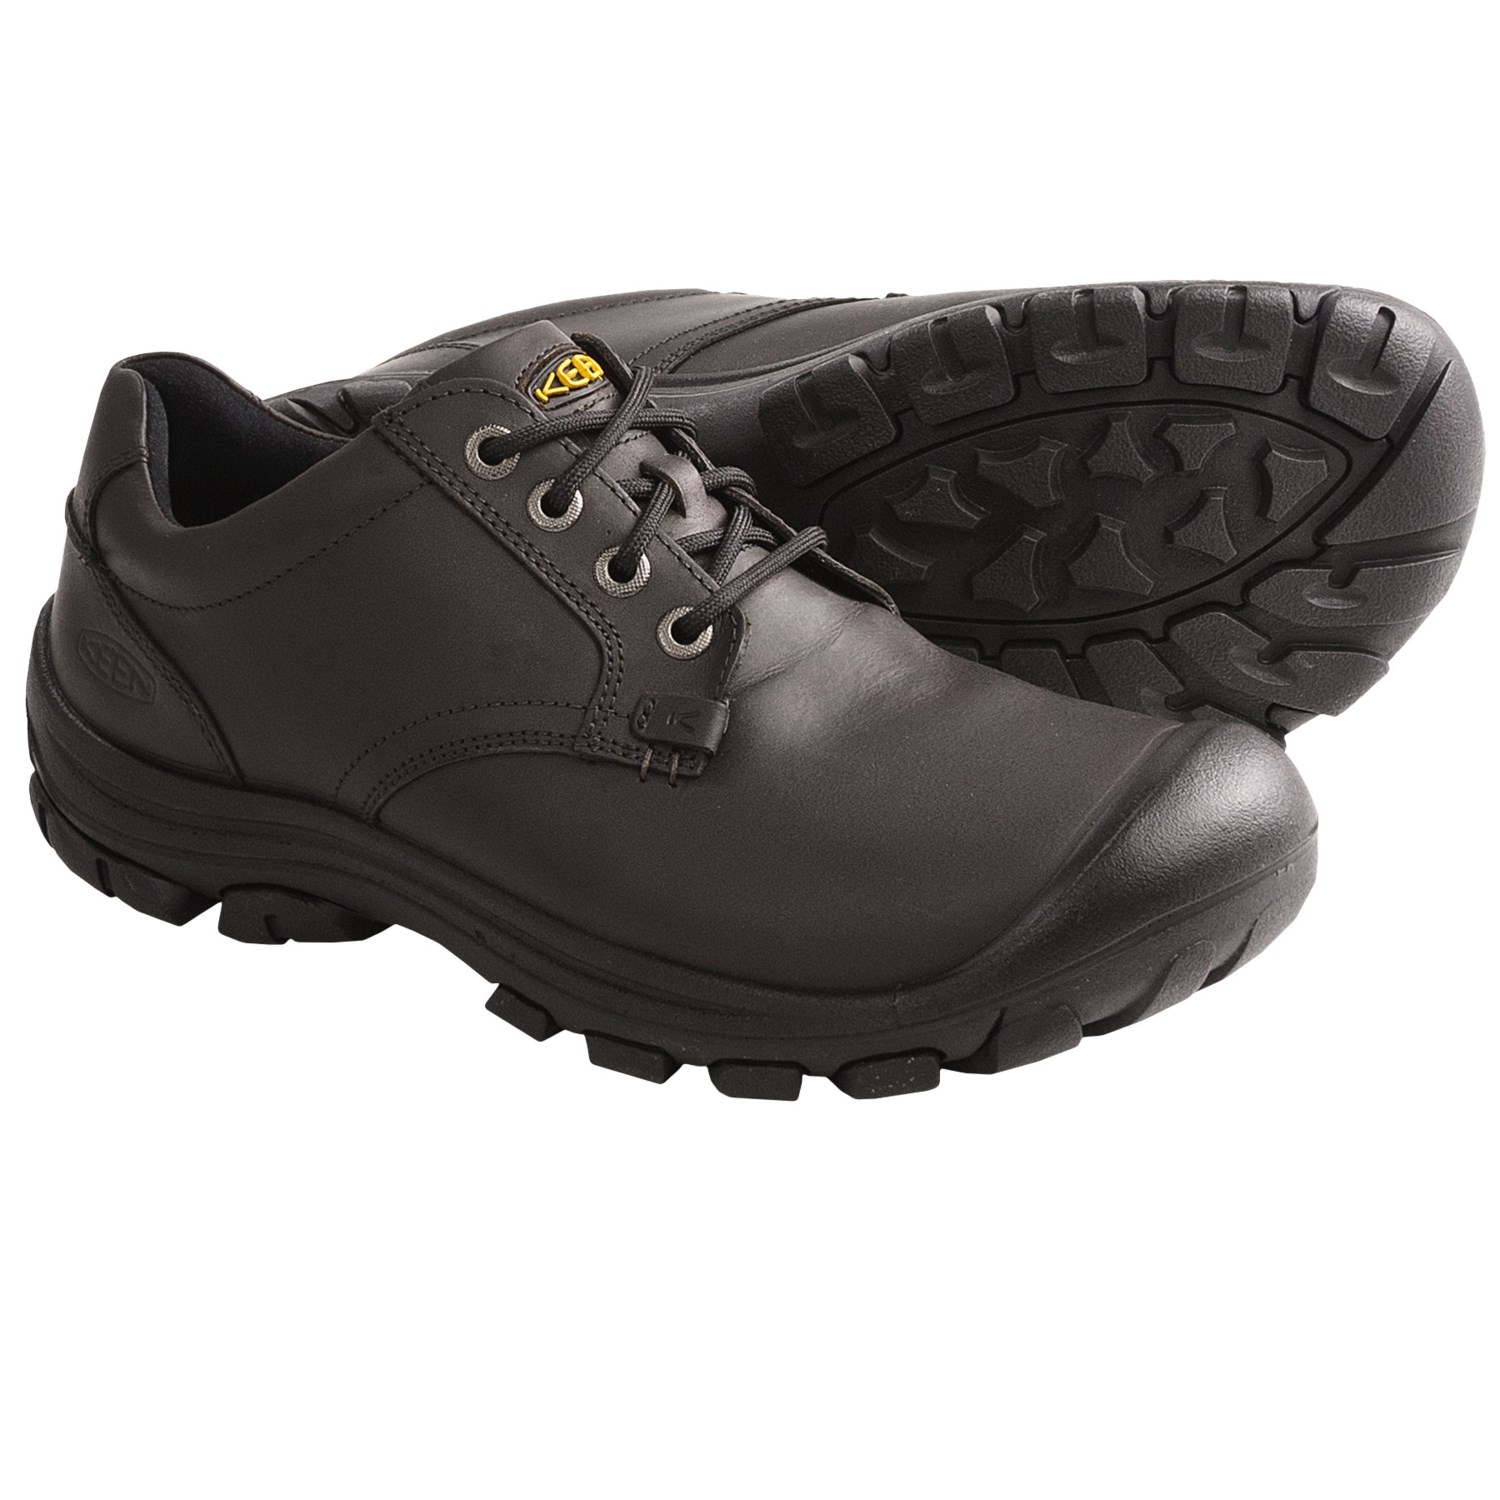 Keen Ontario Shoes - Leather, Lace-Ups (For Men) in Slate Black